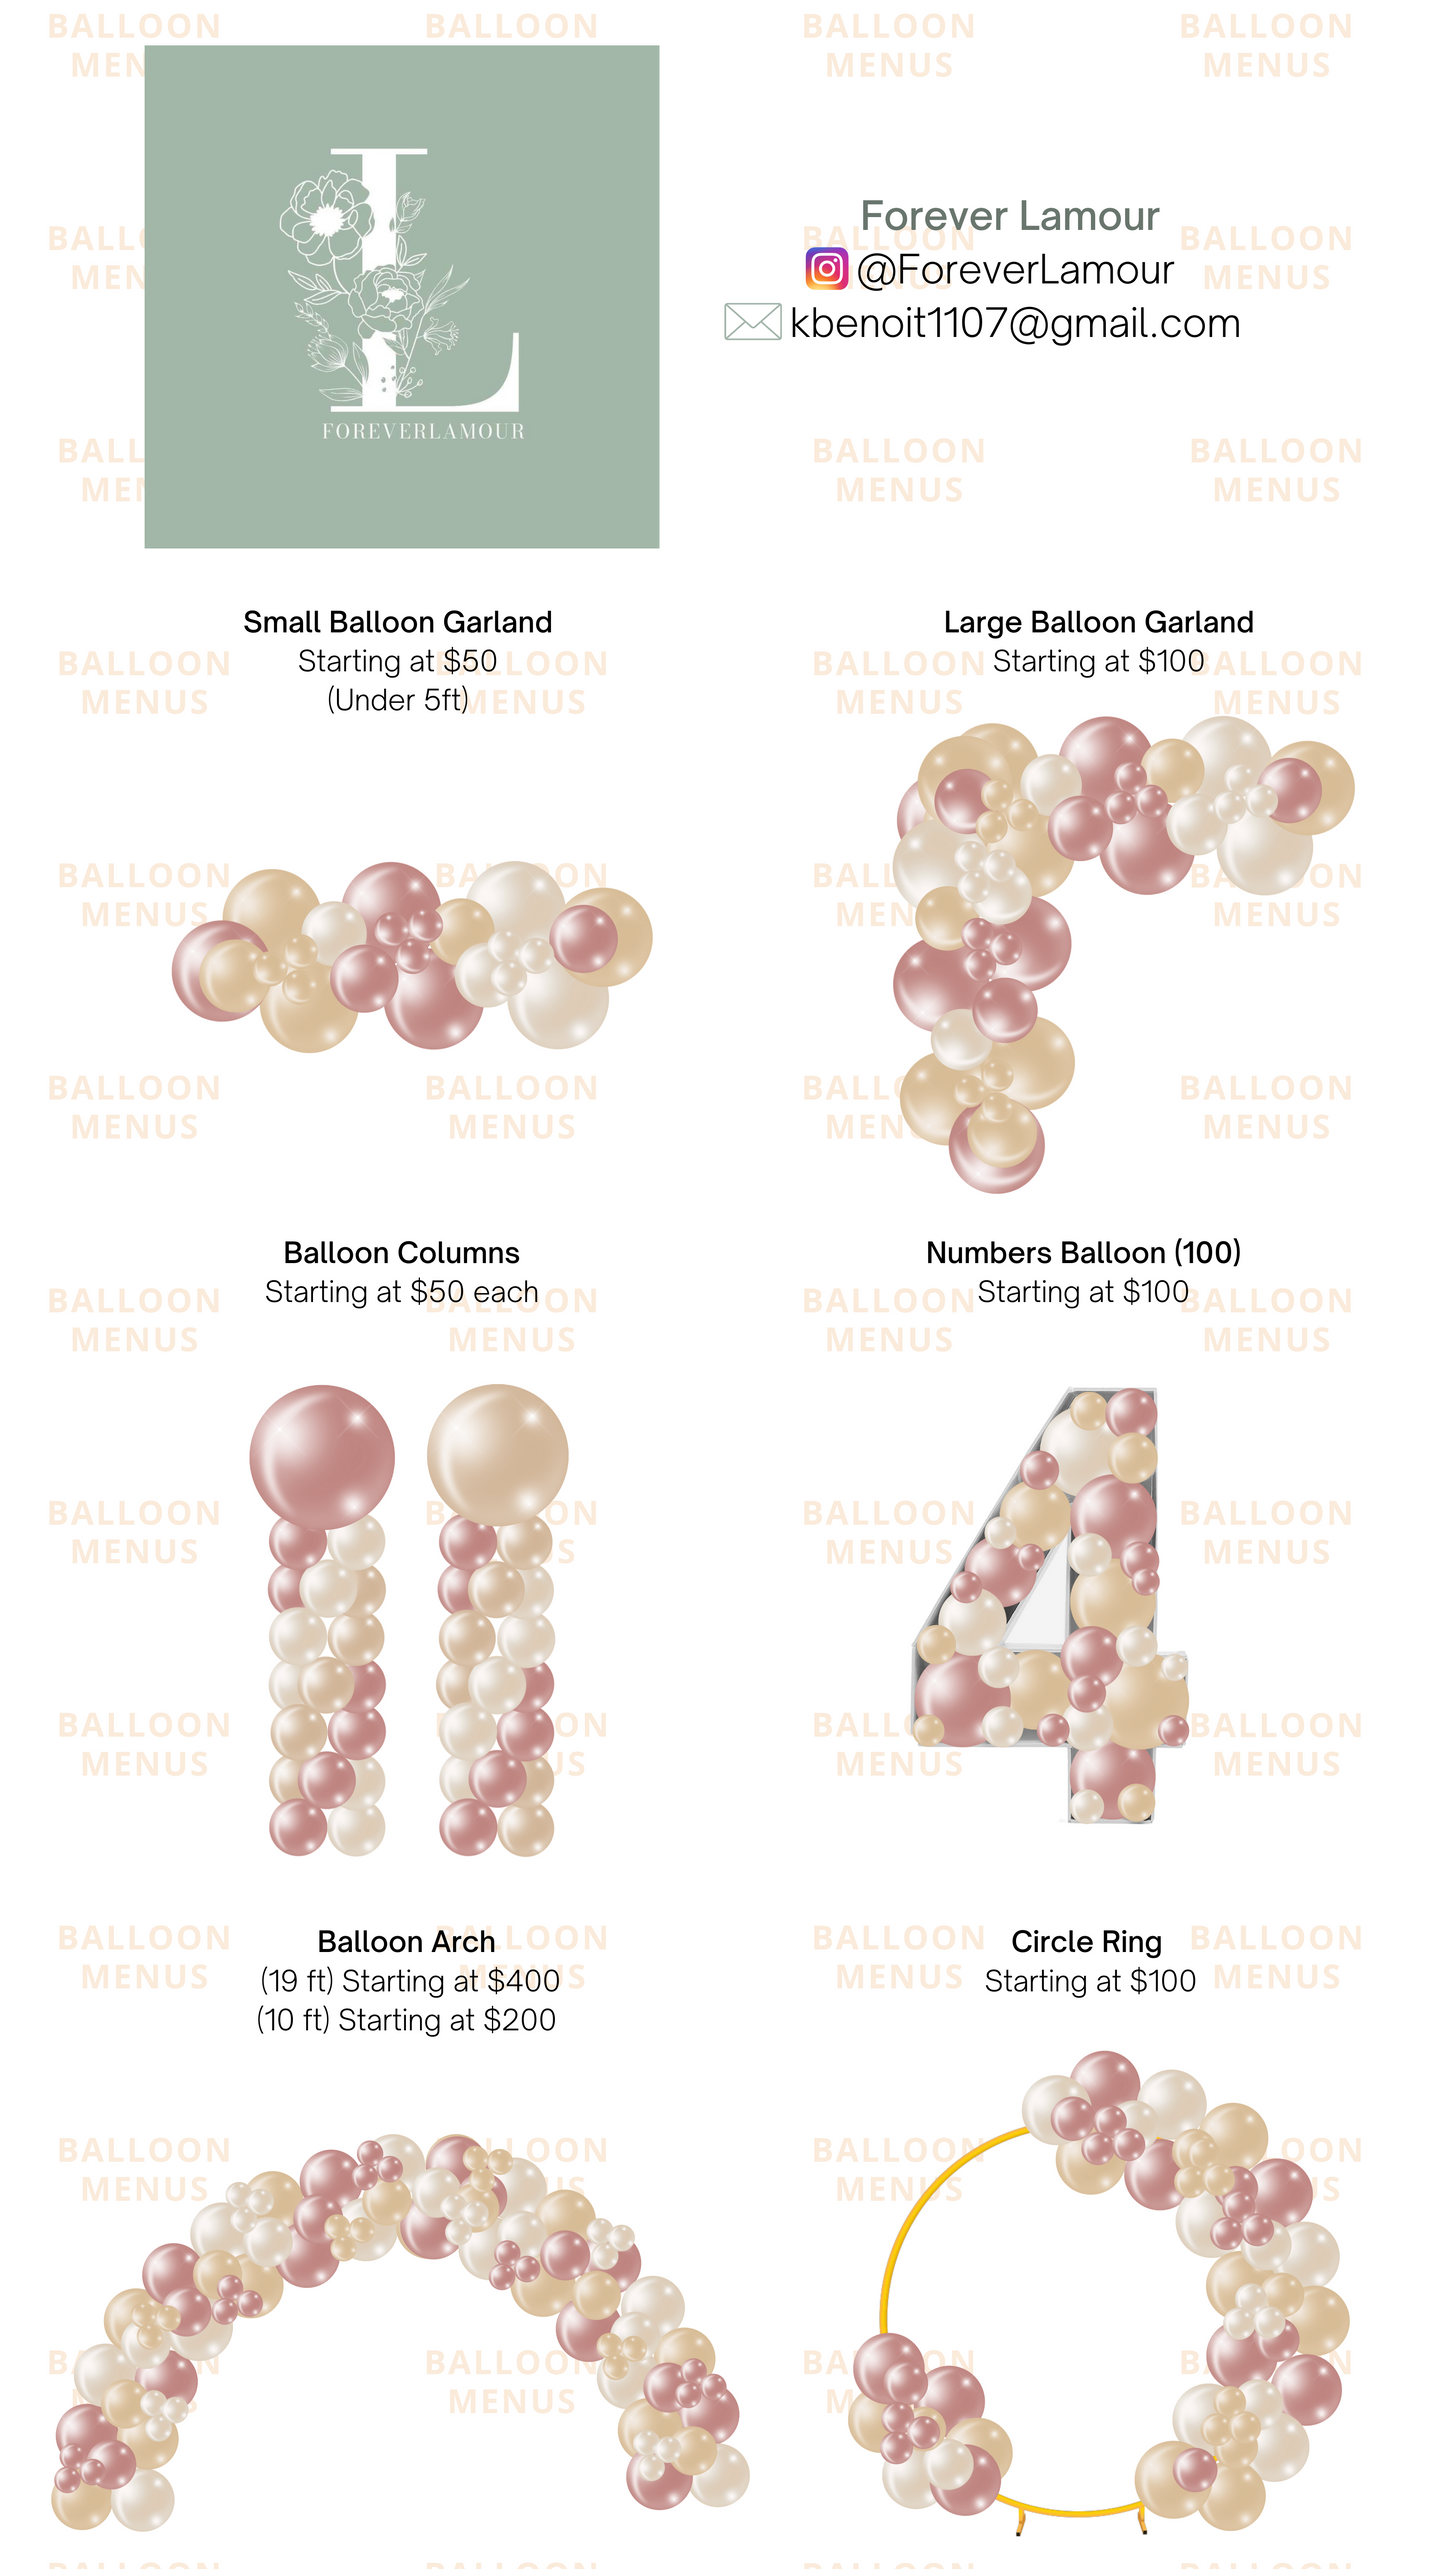 Forever Lamour - Client Balloon Menu